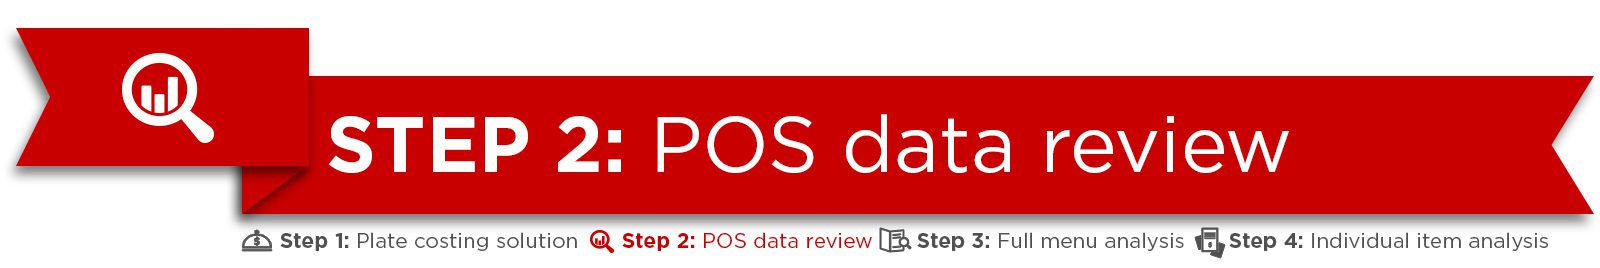 Step 2: POS data review